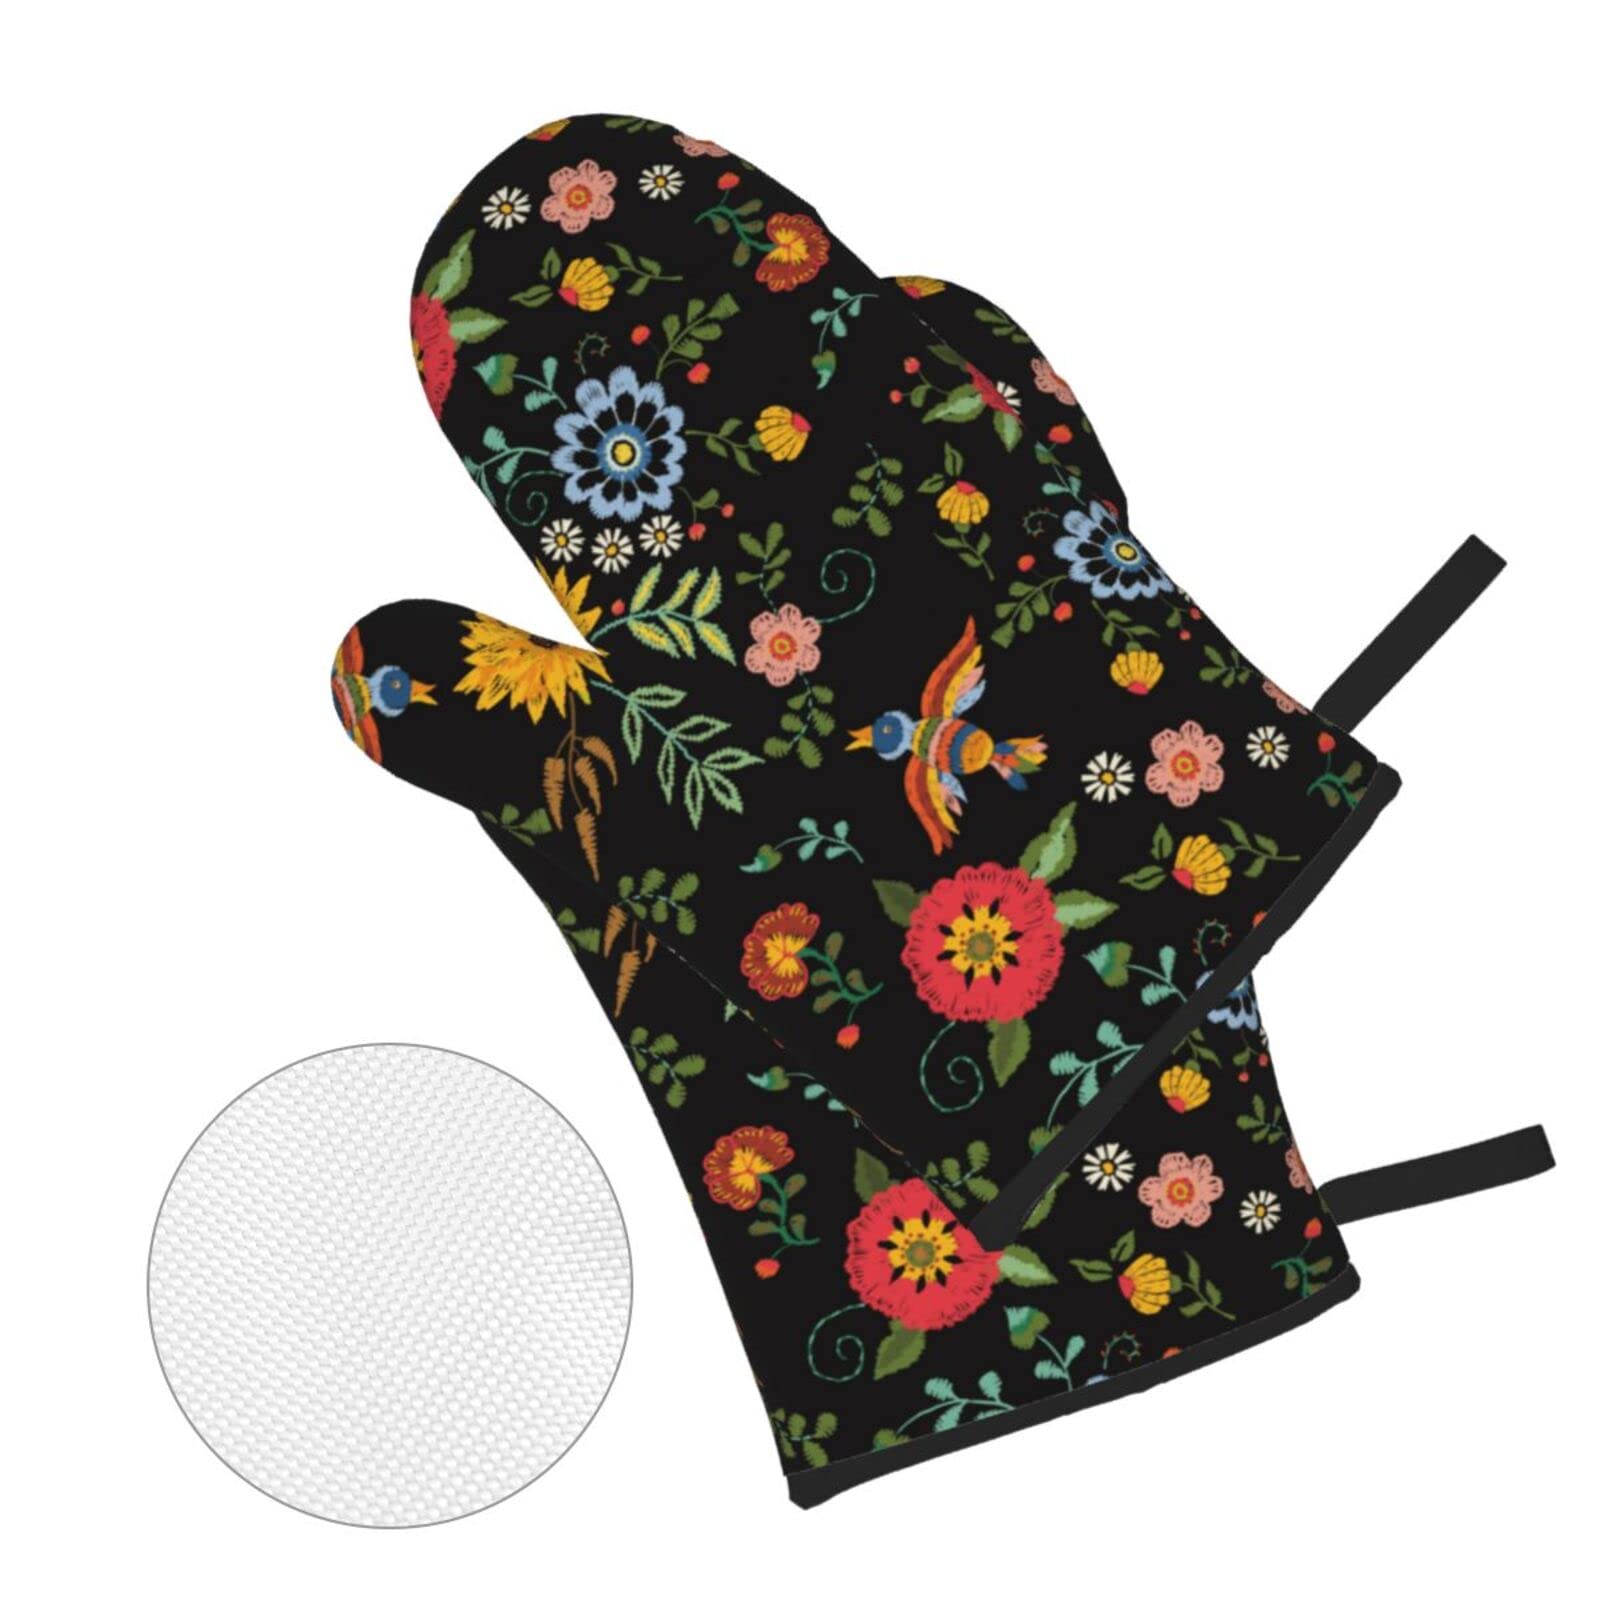 Colorful Floral Birds Oven Mitts and Pot Holders Sets of 4,Non-Slip Heat Resistant Oven Gloves for Baking Cooking Grilling BBQ